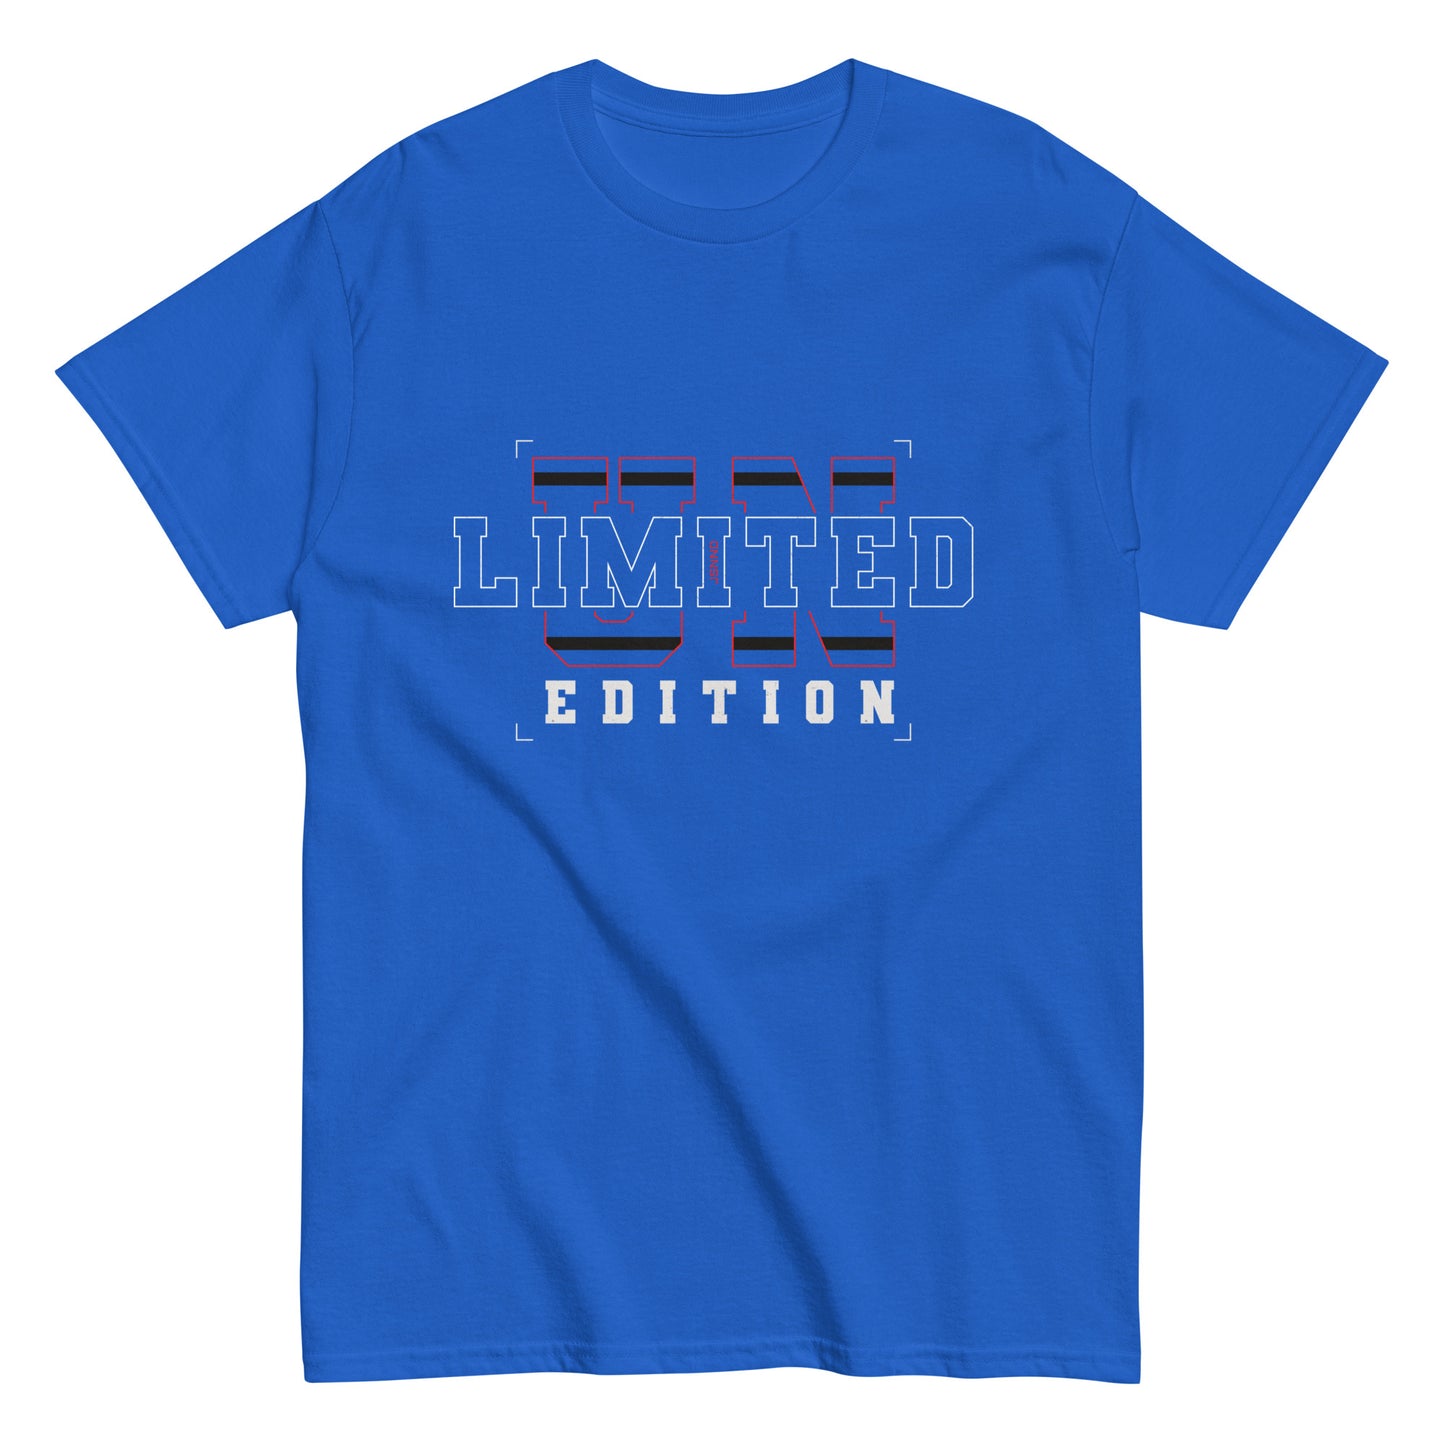 Unlimited Edition T-shirt